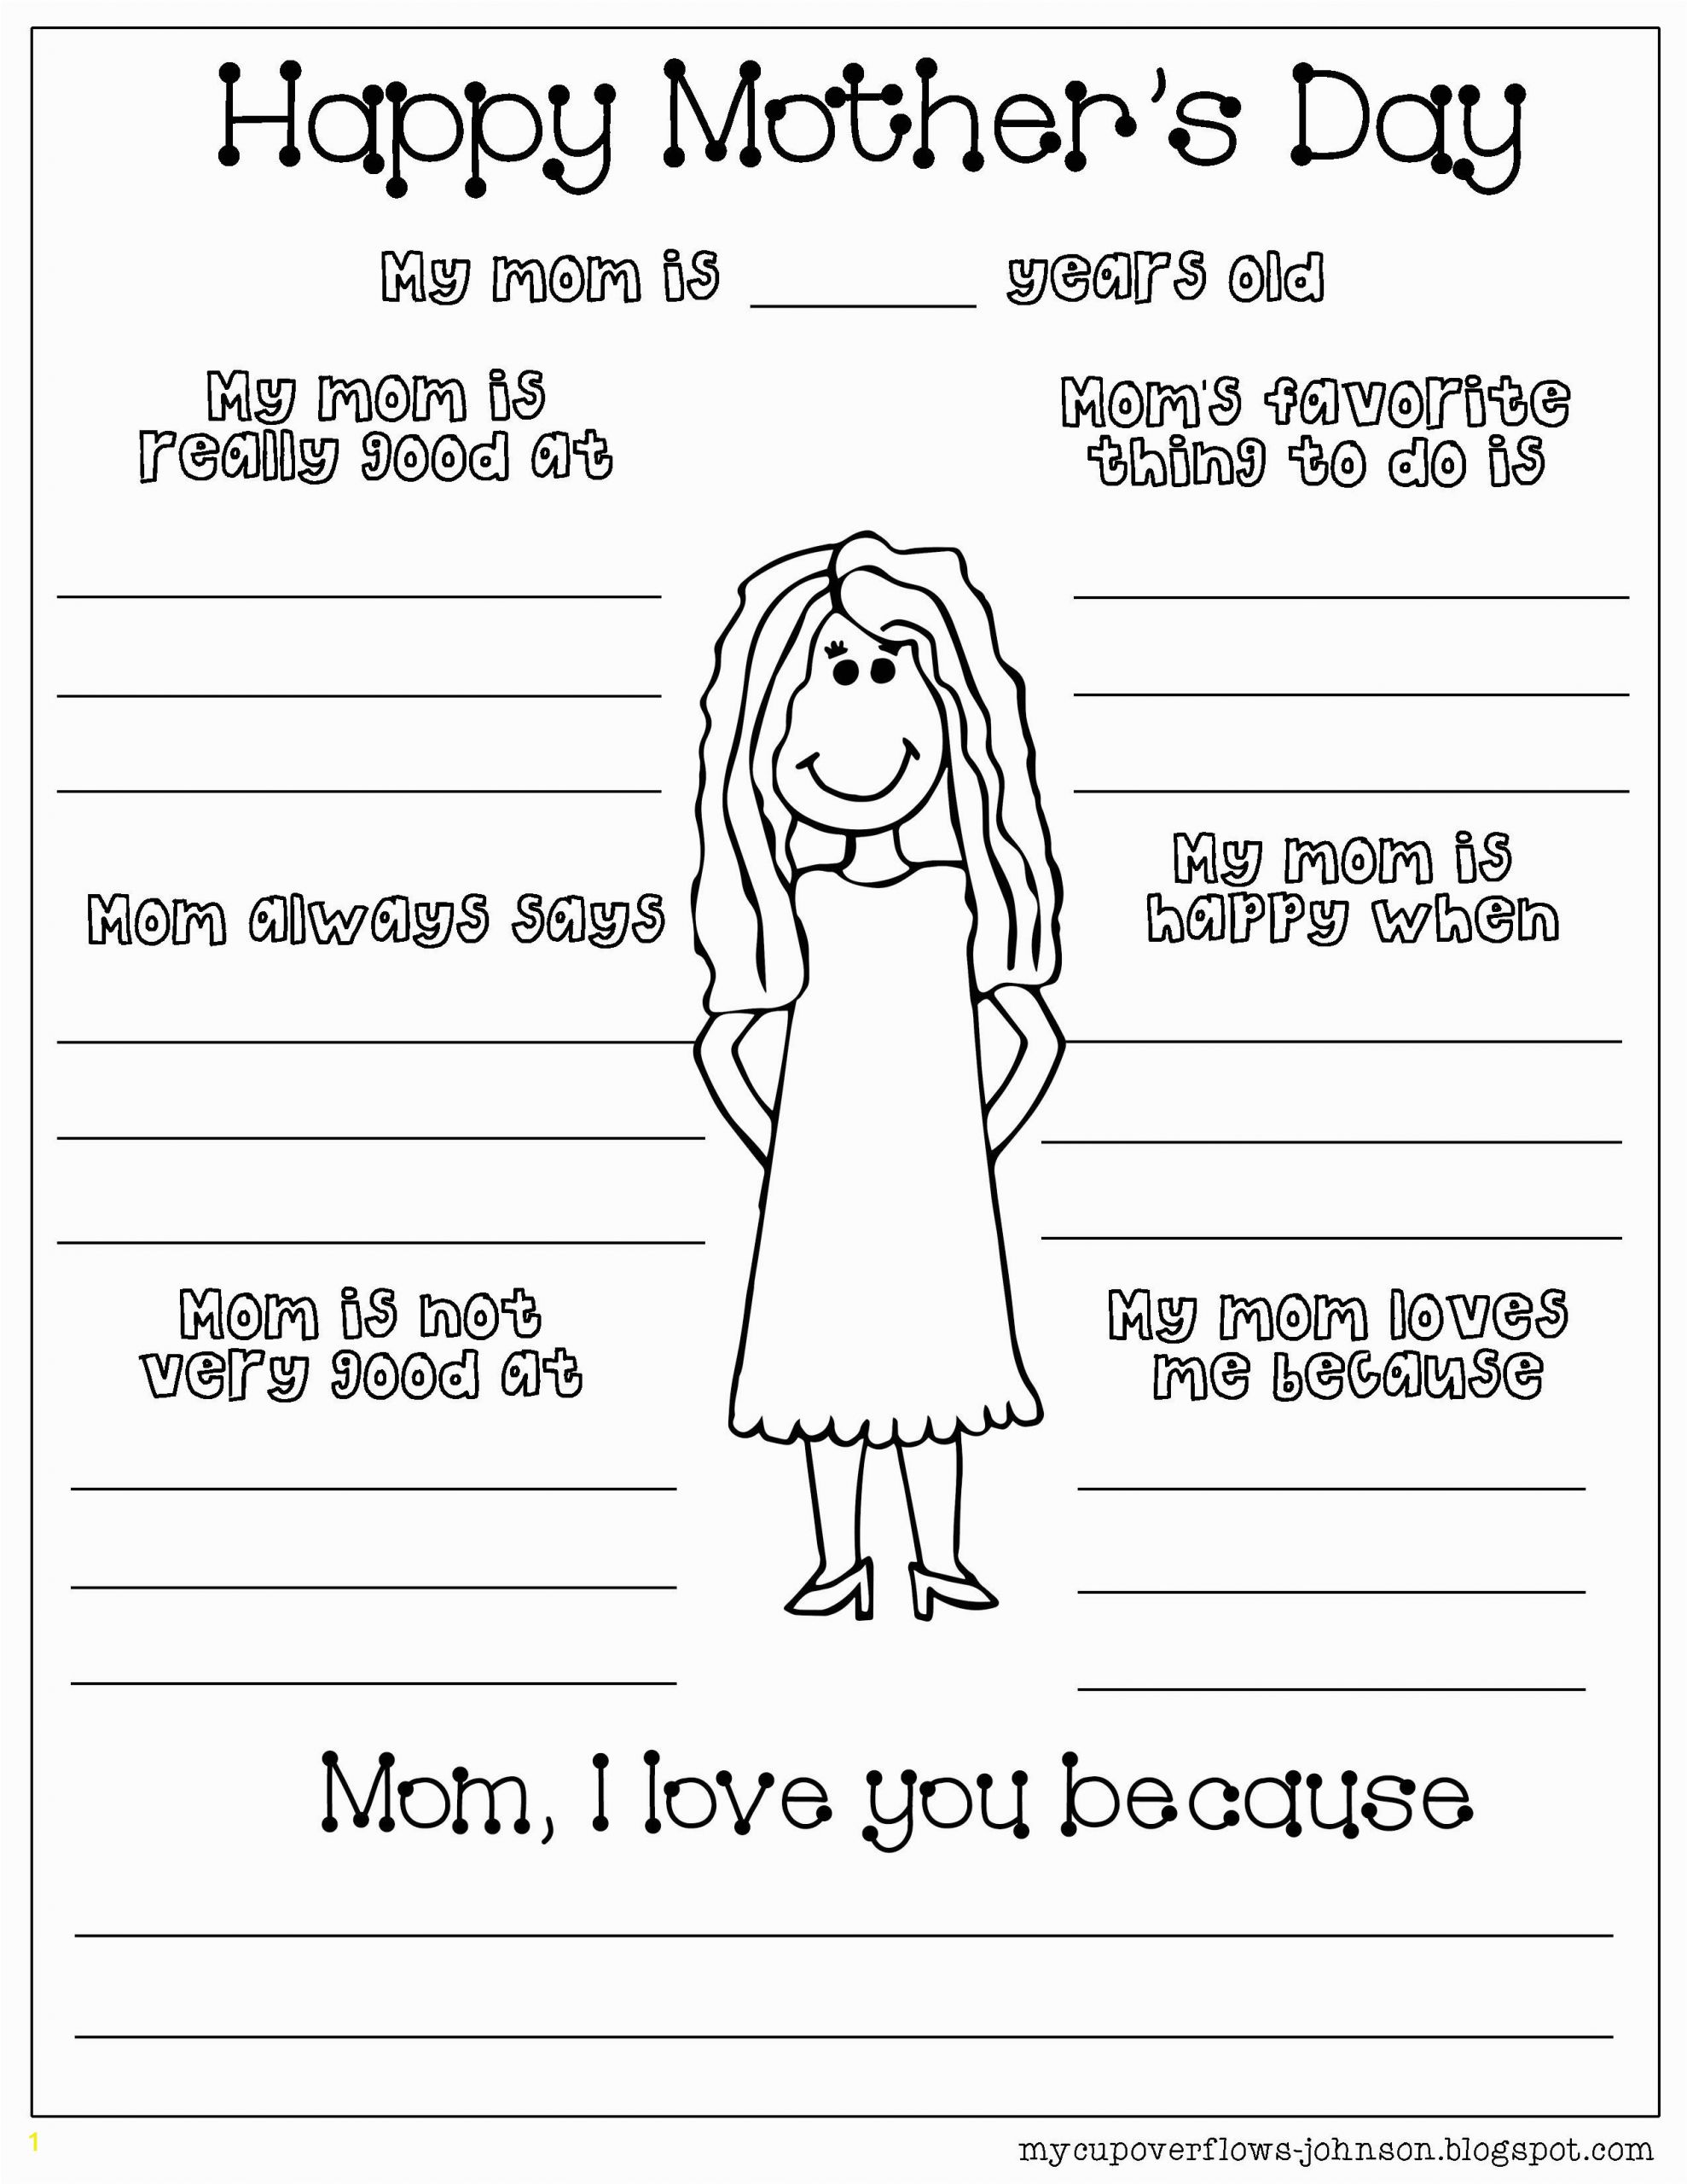 Printable Mothers Day Coloring Pages Mother S Day Coloring Pages